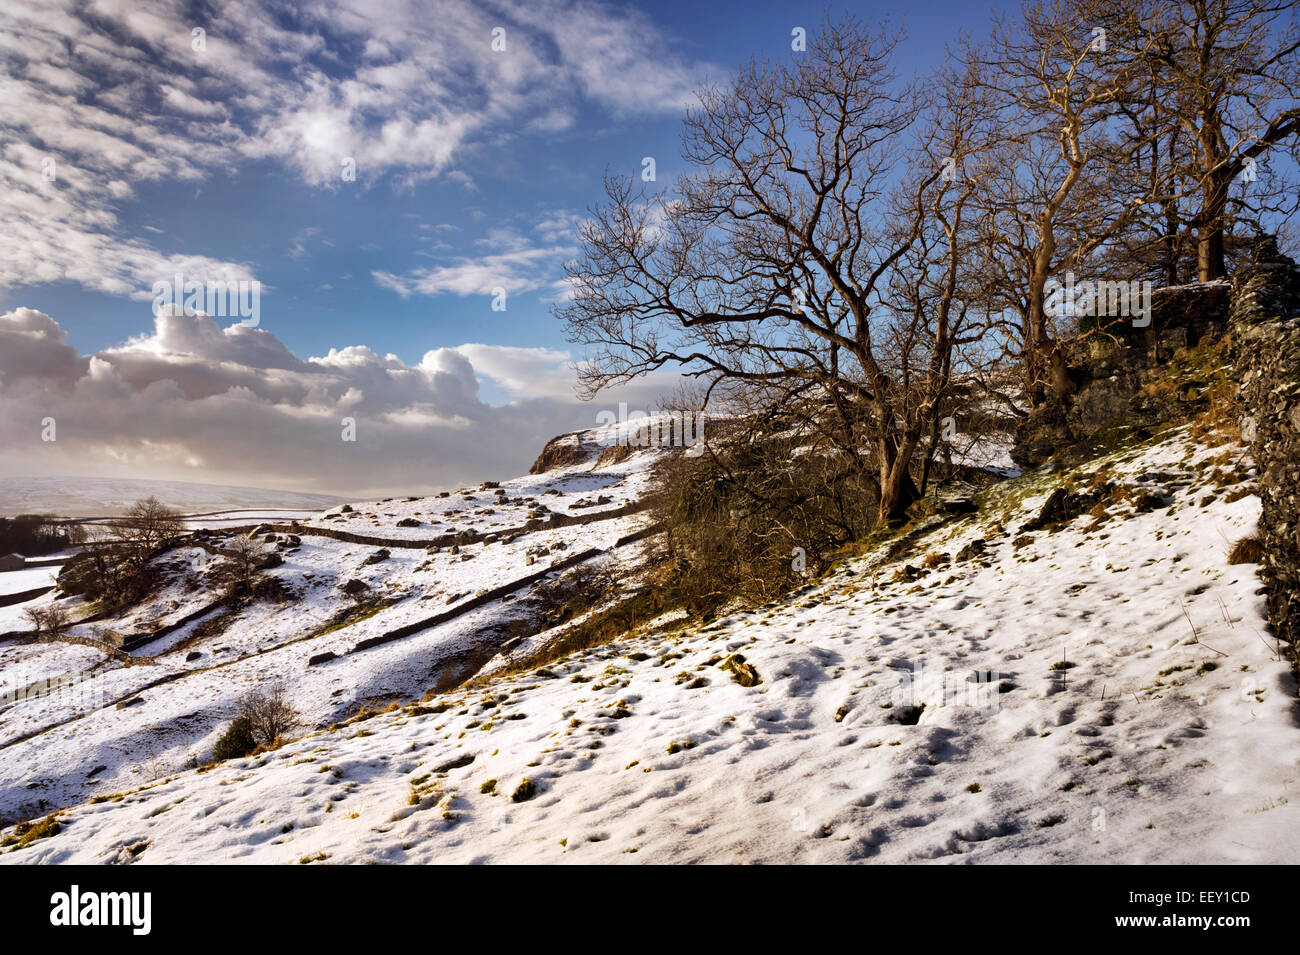 Snow on the Norber plateau, overlooking the village of Austwick, Yorkshire Dales National Park, UK Stock Photo